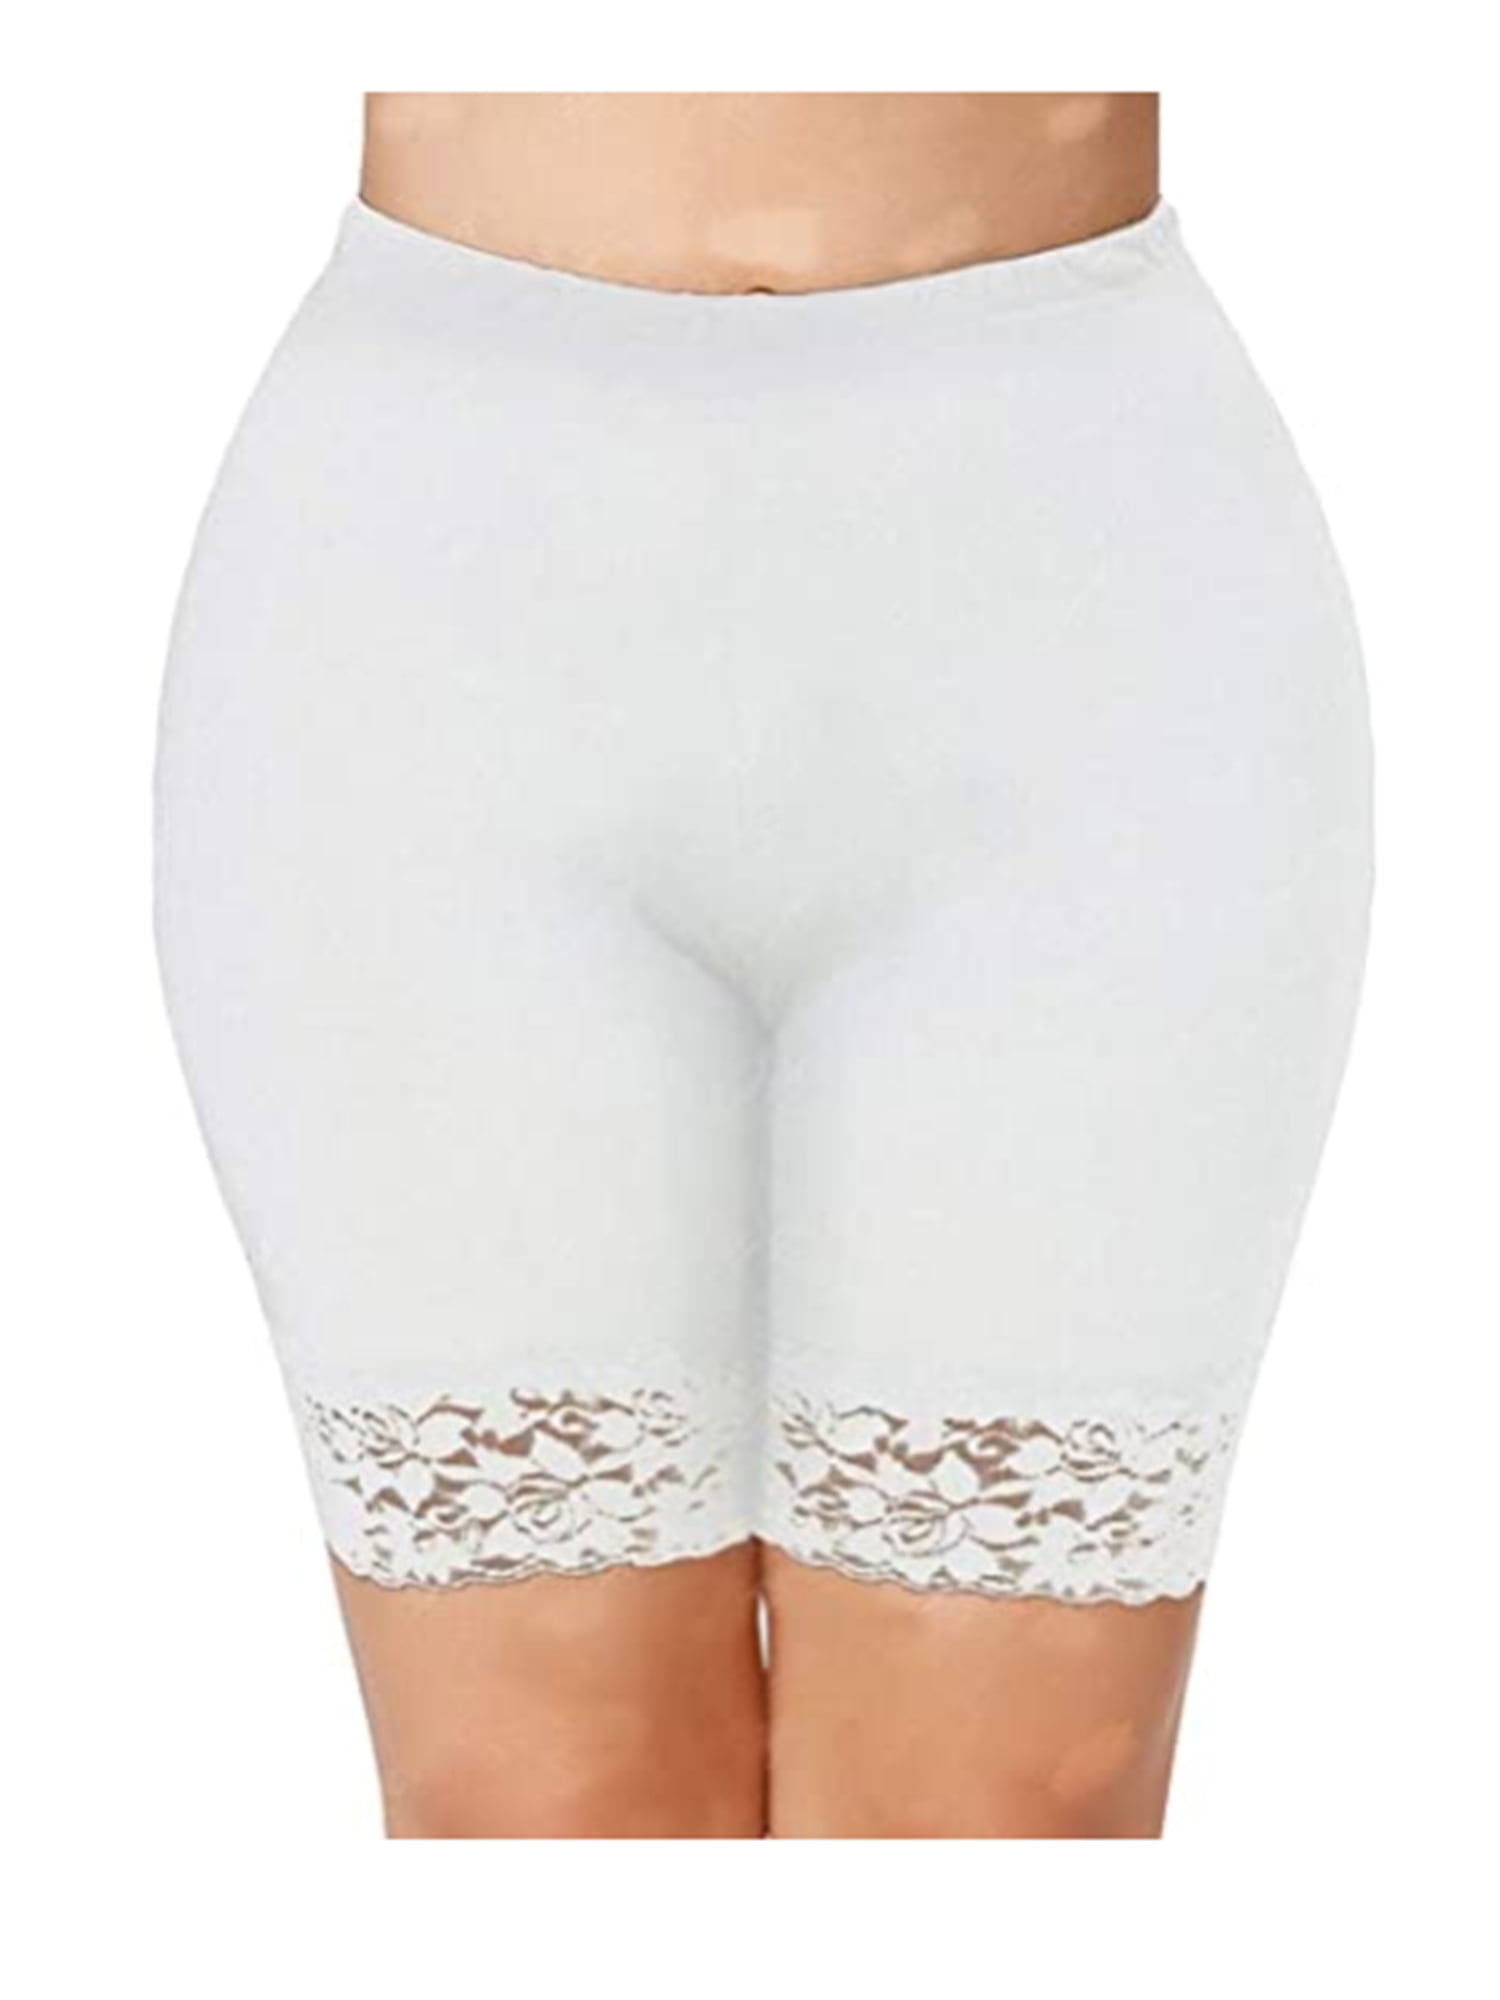 Women Plus Size Lace Insert Stretch Short Leggings Gym Tights Viscose  Active Shorts Cycling Hot Pants High Waist Safety Shorts